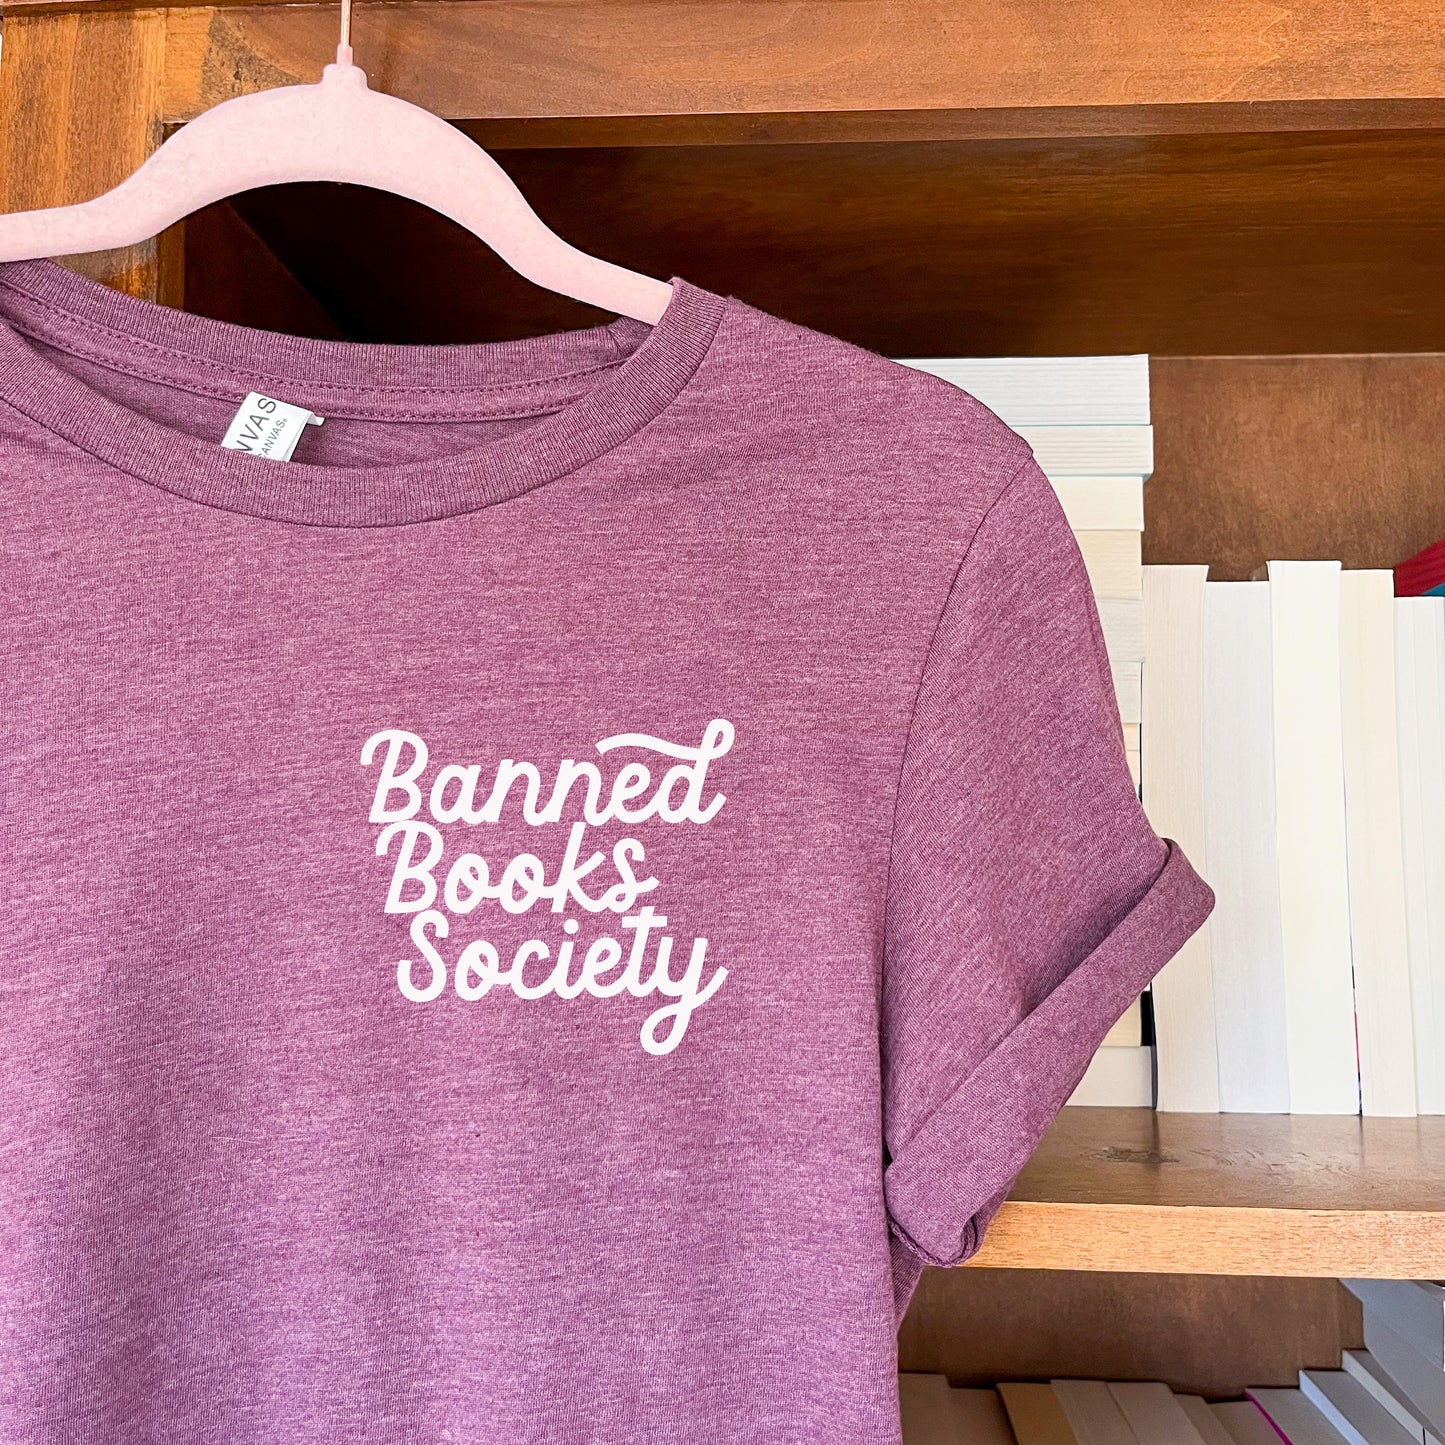 Banned Books Society T-shirt